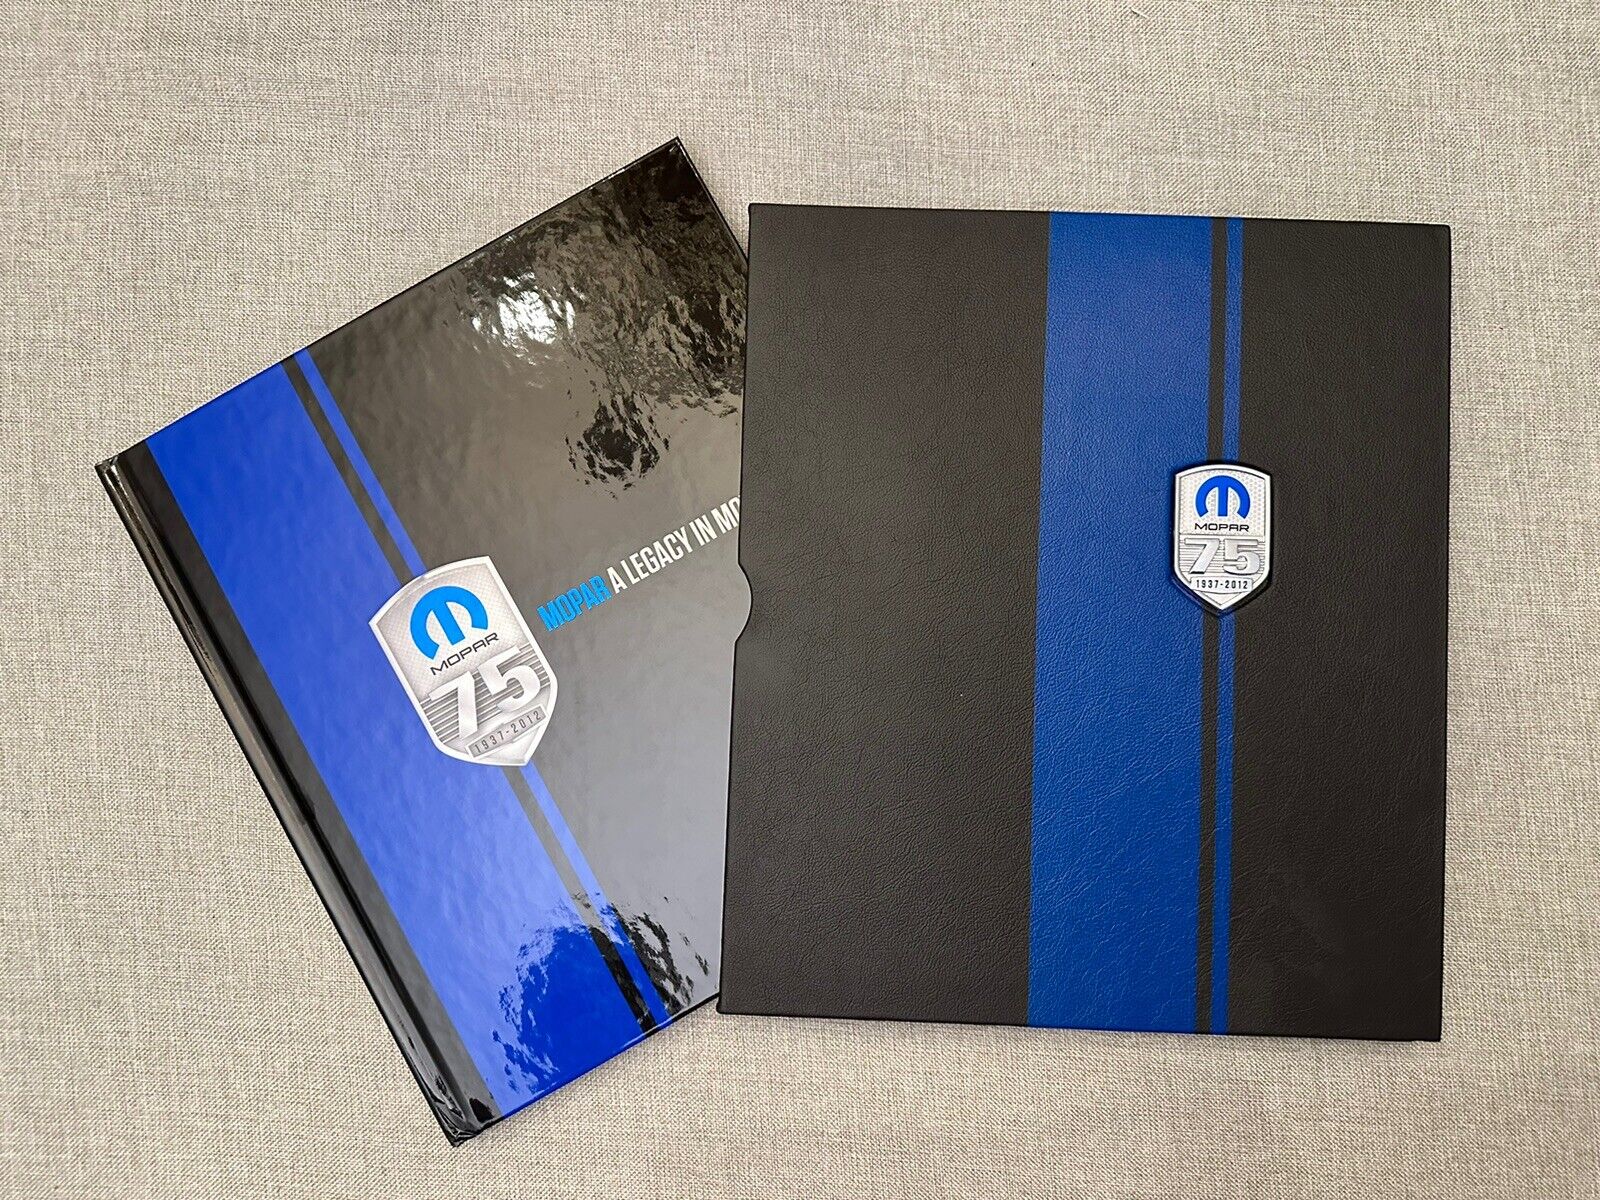 Mopar A Legacy In Motion - 75th Anniversary Picture Book in Sleeve